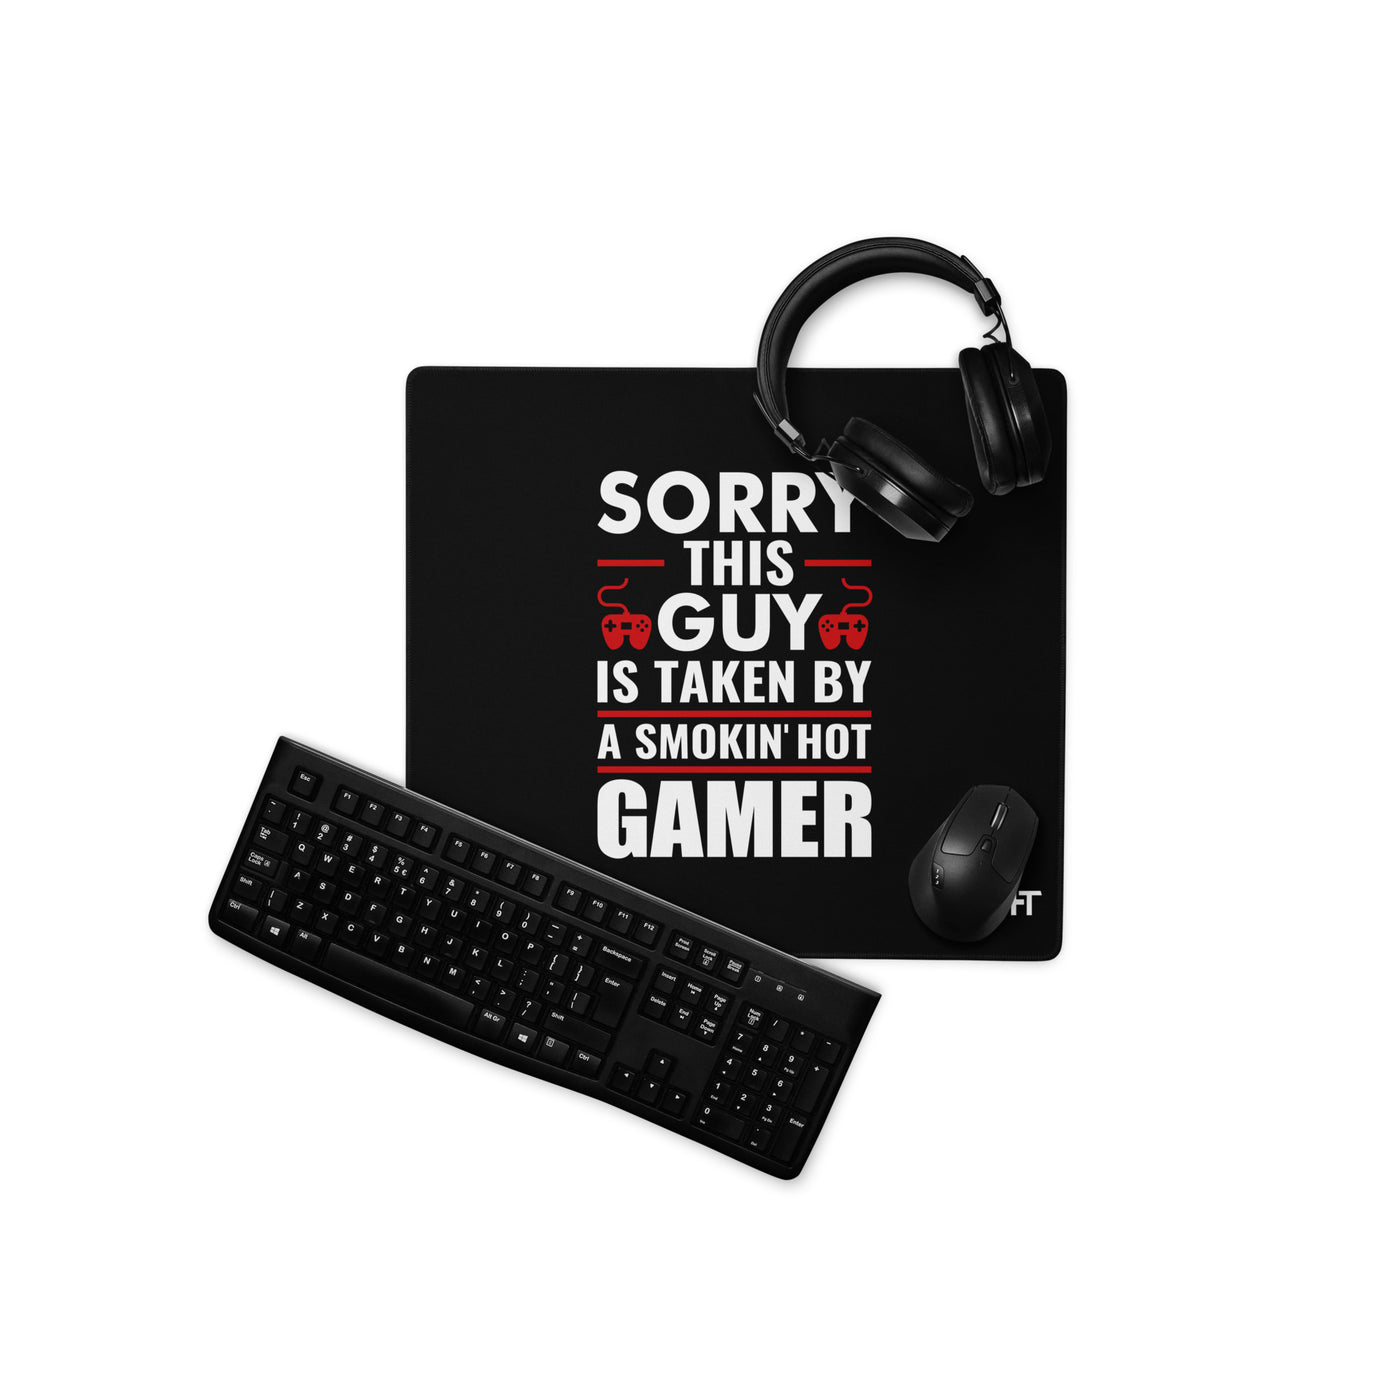 Sorry, this Guy is taken by a smoking hot Gamer - Gaming mouse pad